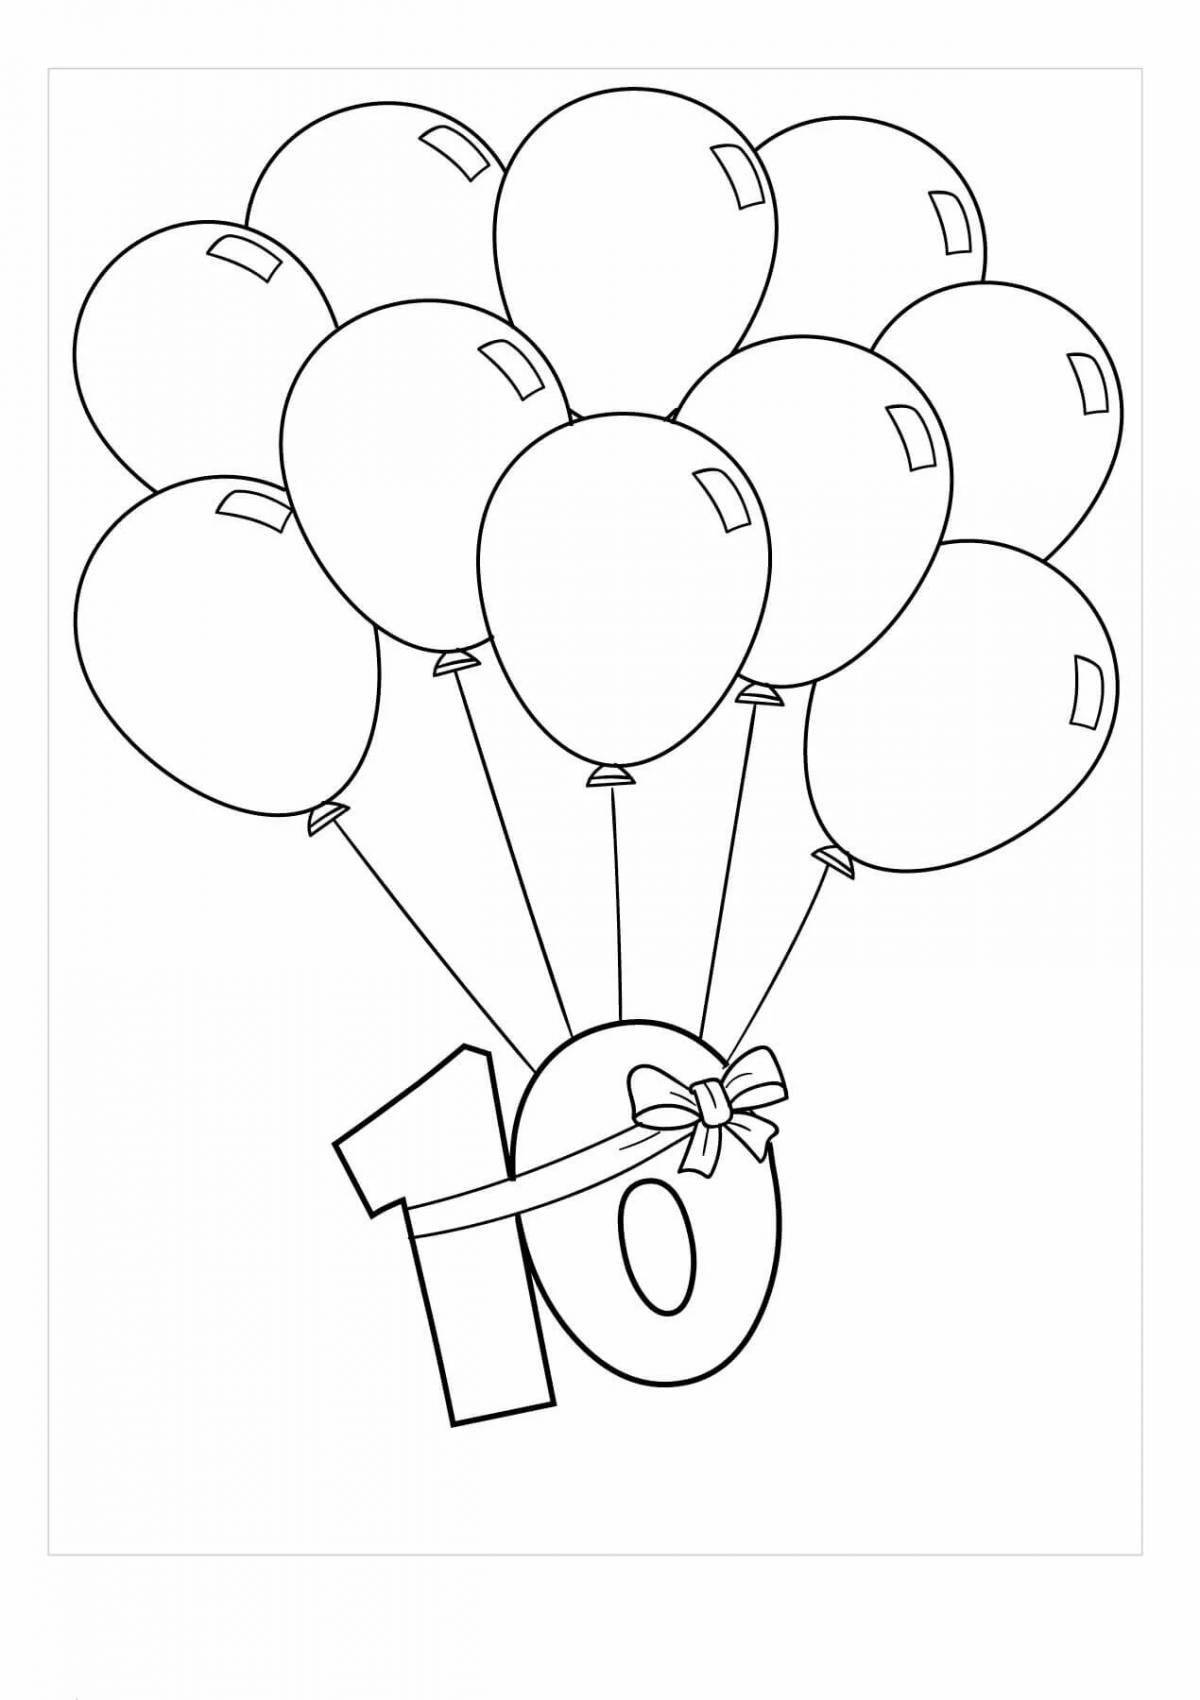 Coloring book glowing bunch of balloons